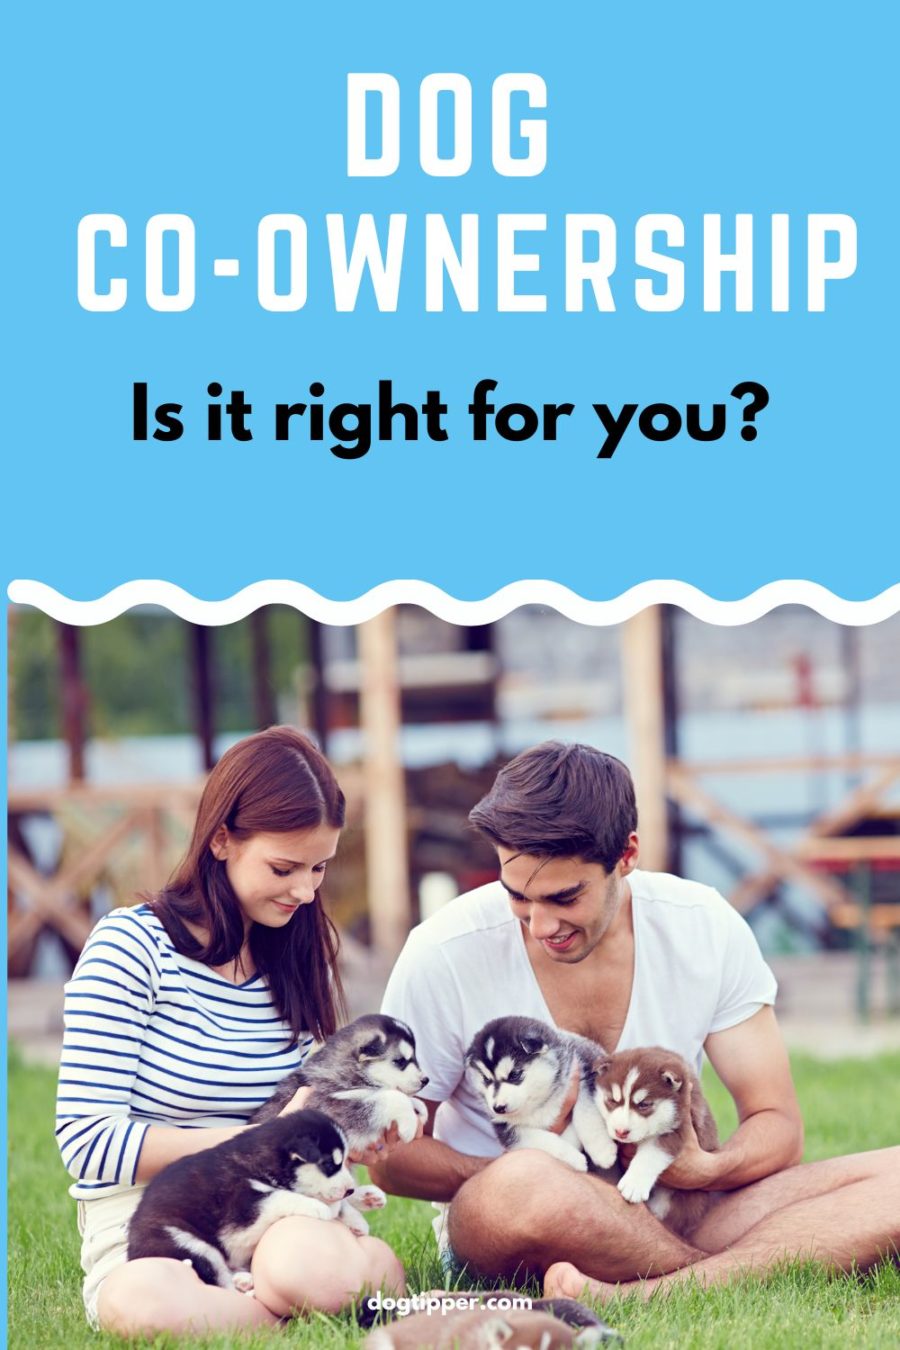 Dog Co-Ownership: Is Co-Owning a Dog Right for You?